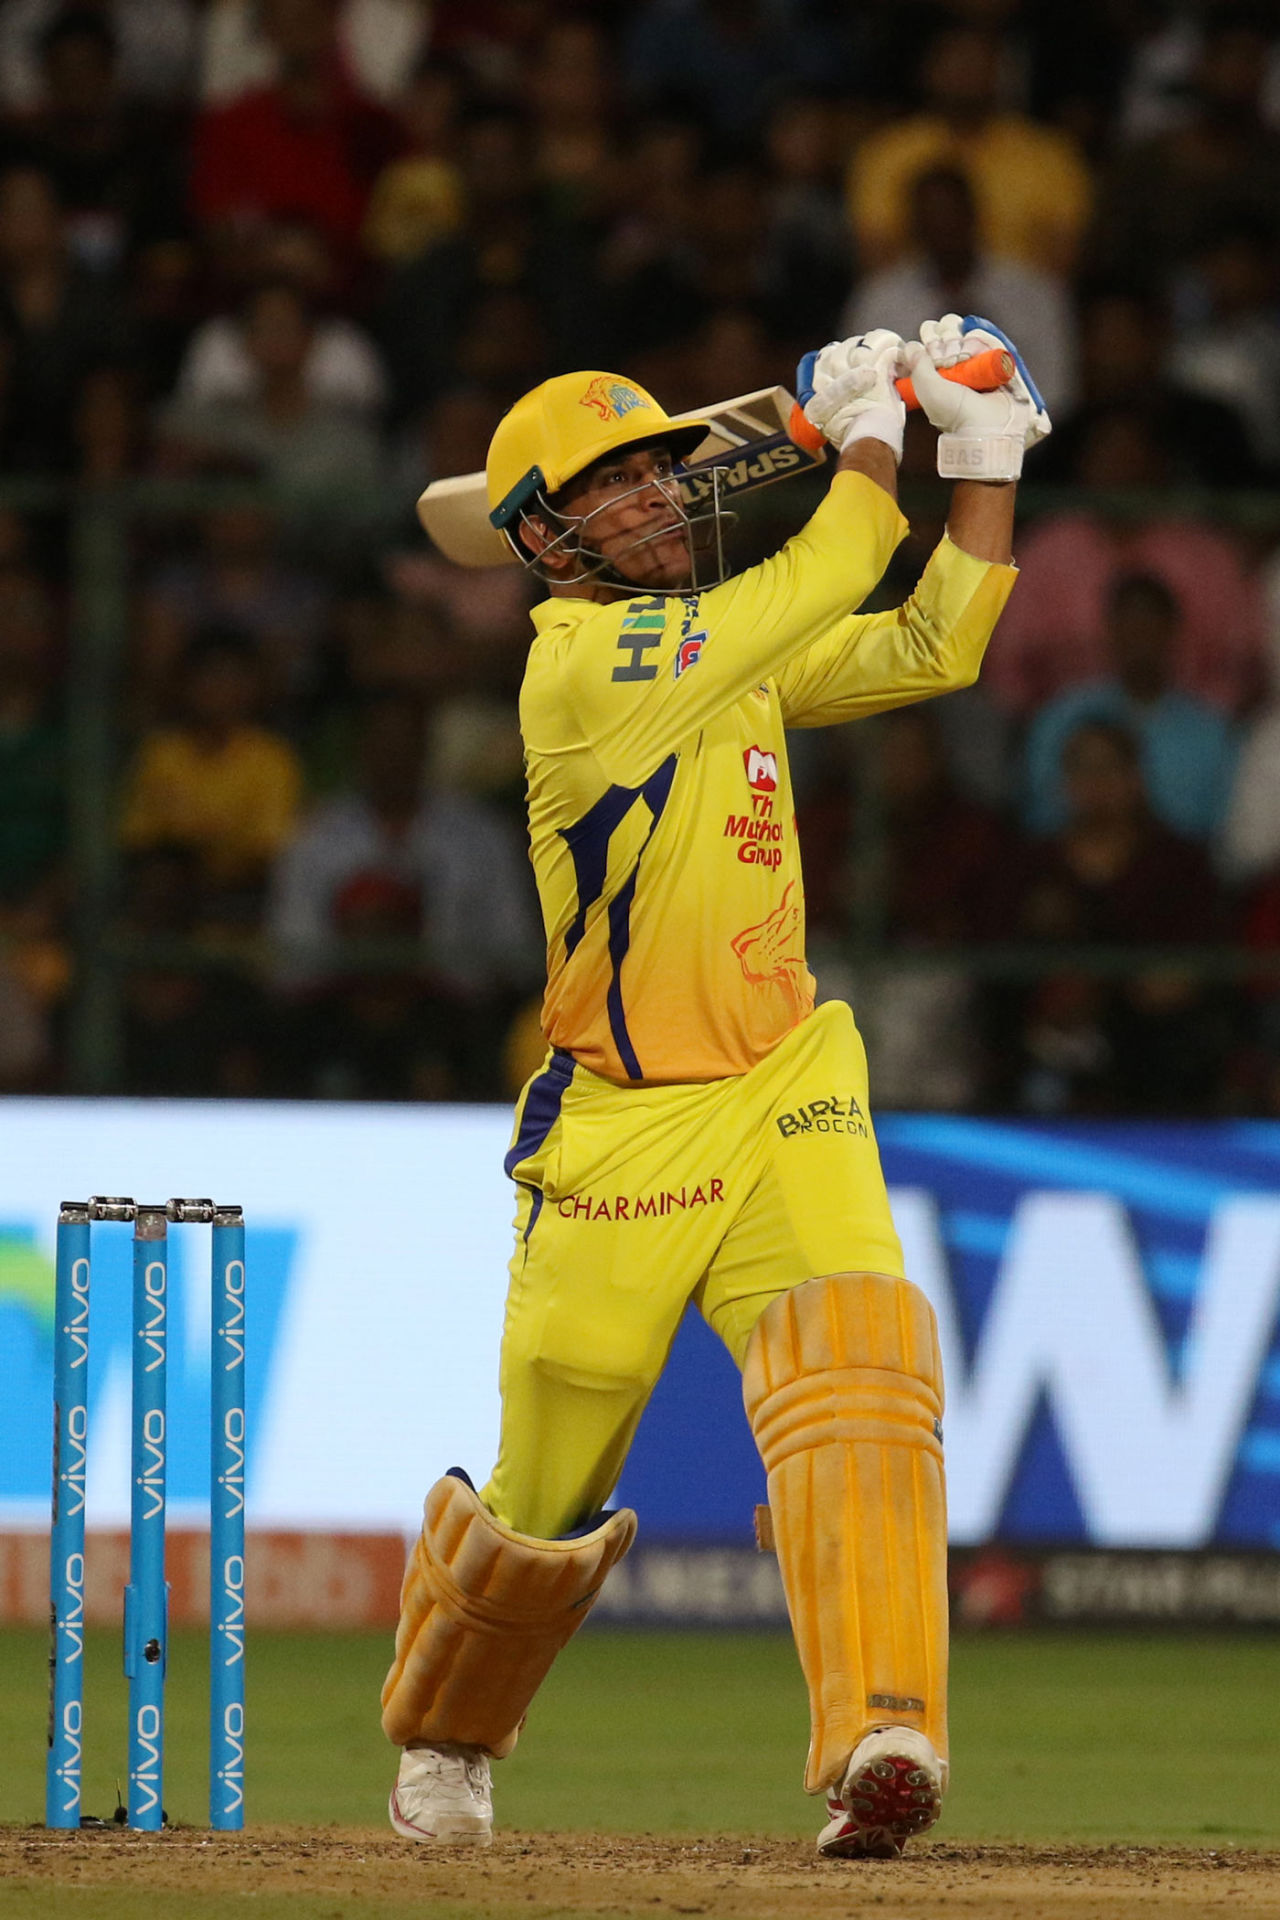 MS Dhoni launches one over the boundary, Royal Challengers Bangalore v Chennai Super Kings, IPL, April 25, 2018